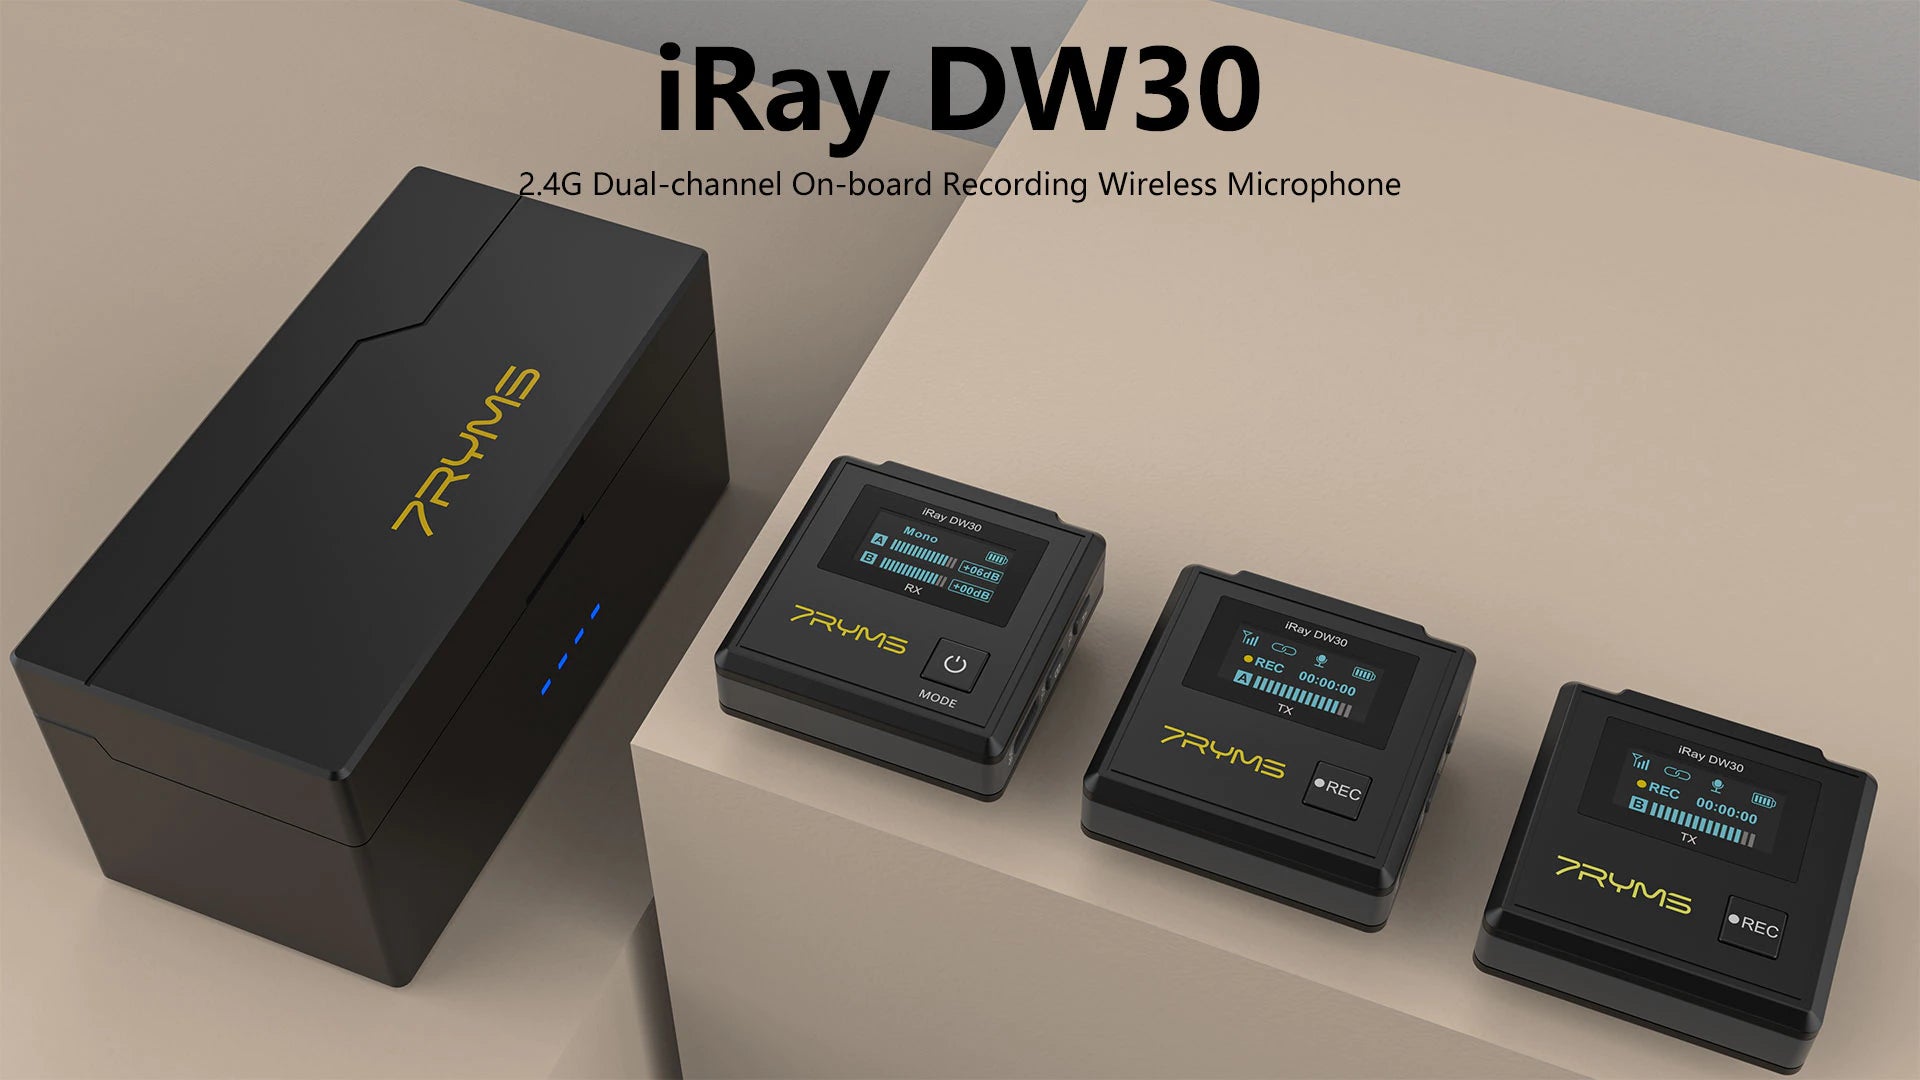 7RYMS iRay DW30 2.4G Dual-channel on-board Recording Wireless Microphone-7